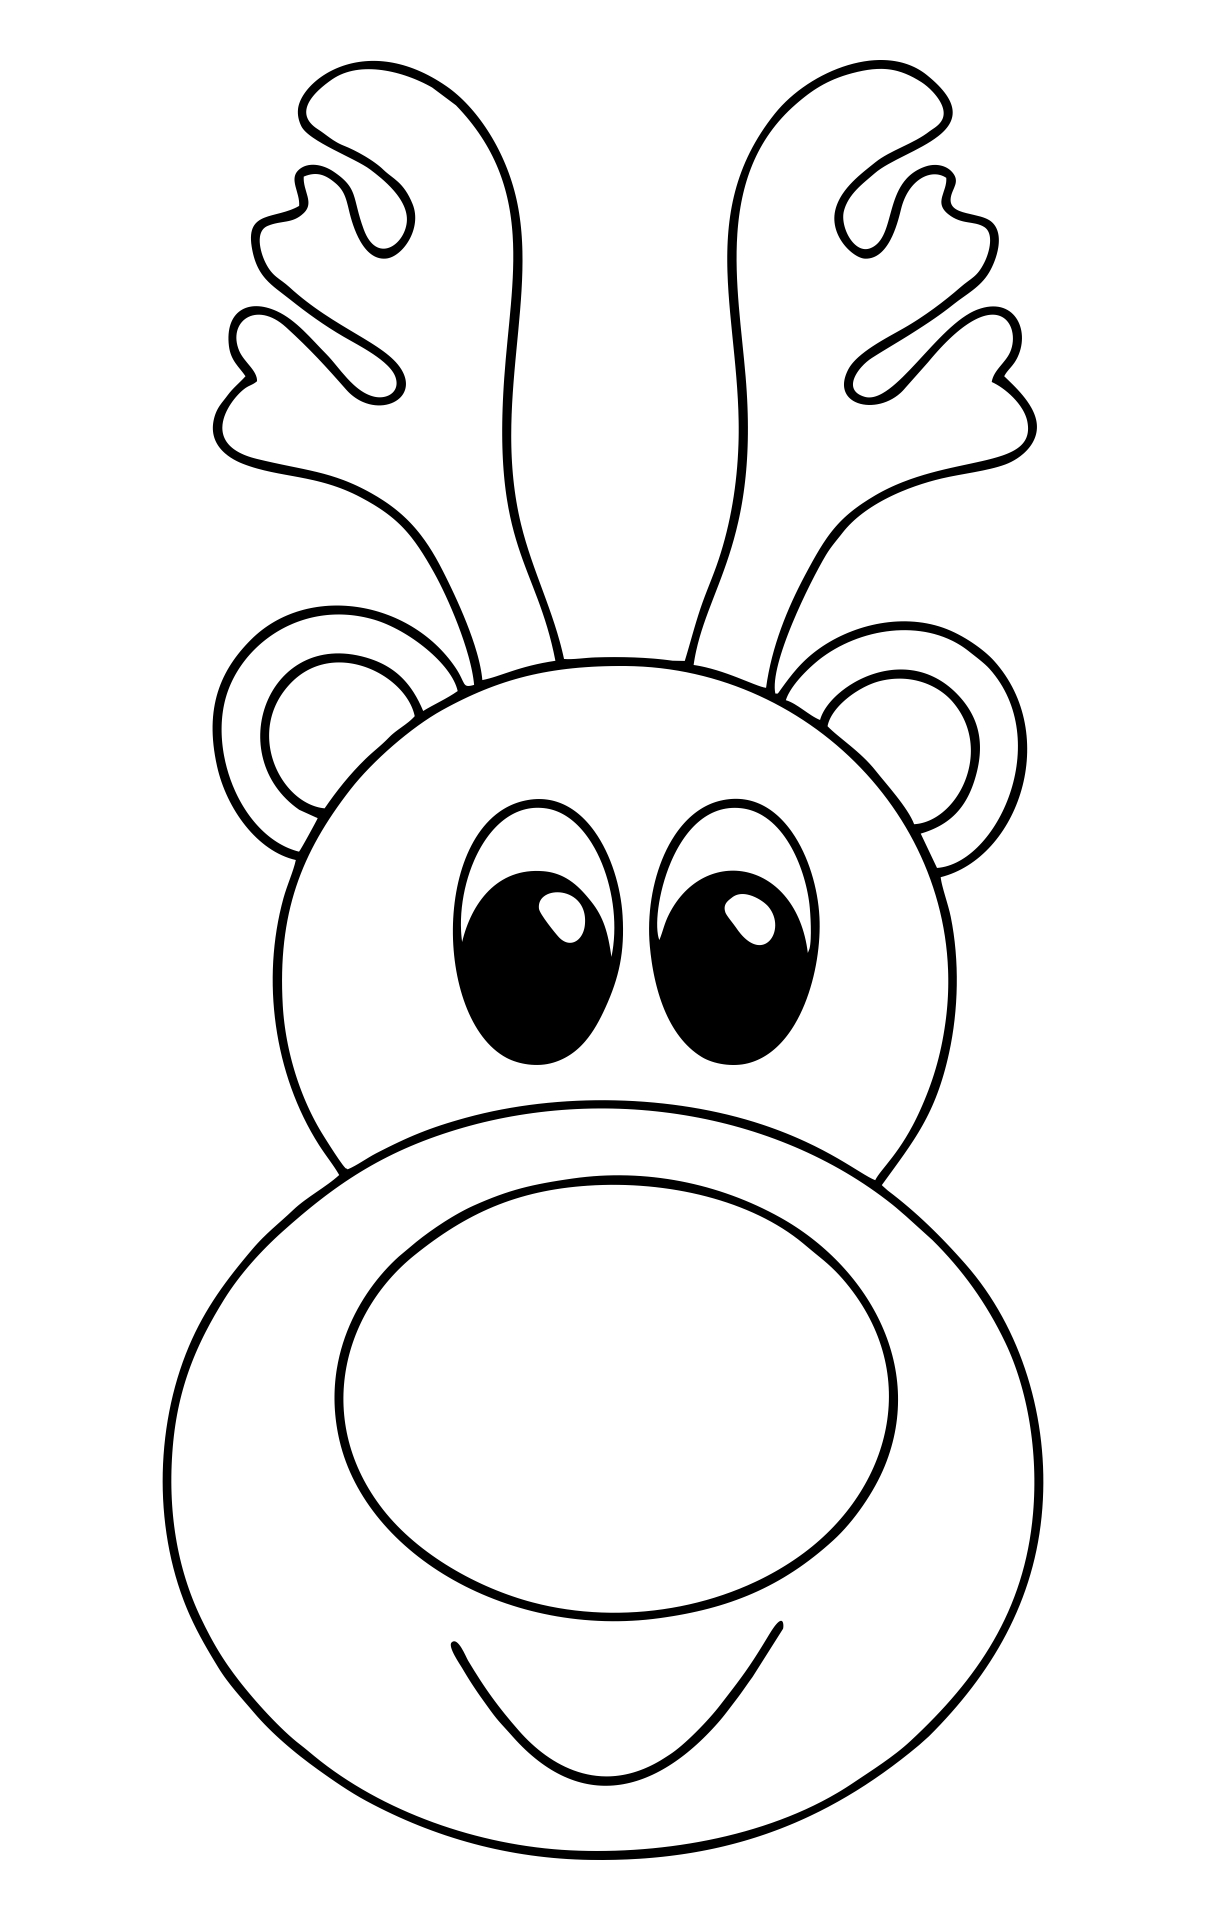 reindeer-face-template-printable-printable-word-searches